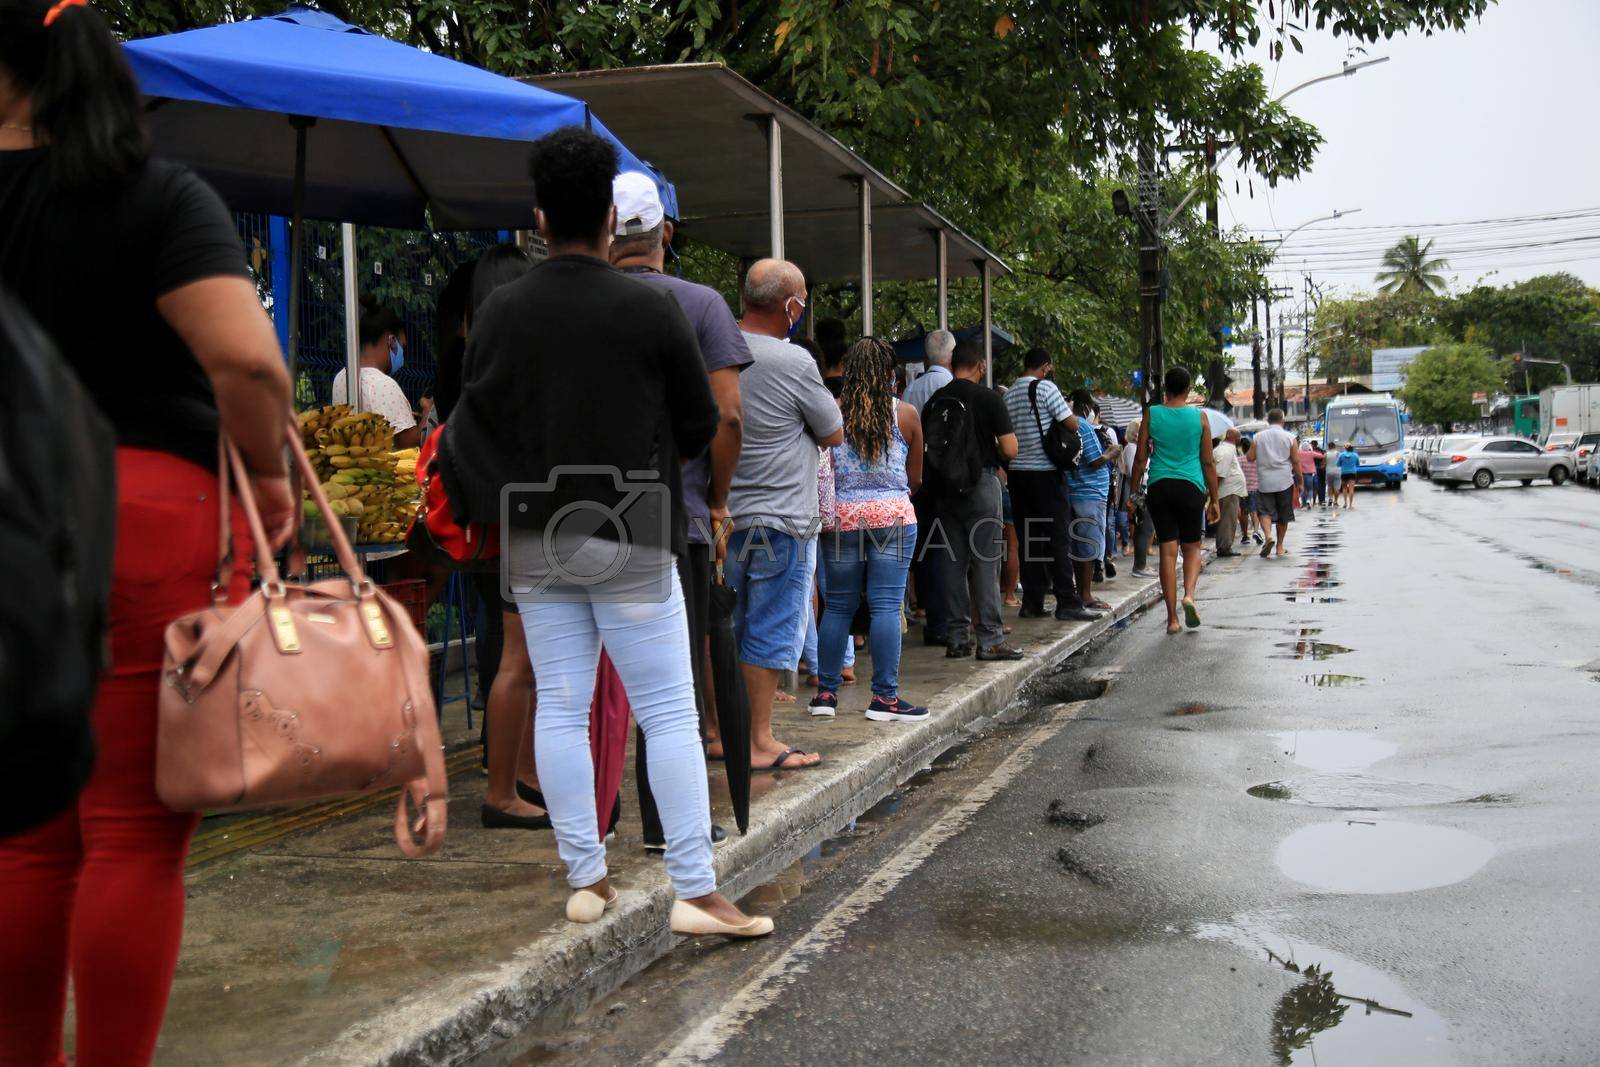 salvador, bahia, brasil - 22 de junho de 2021: Passengers are seen waiting for public transport at a bus stop in the Cabula neighborhood of the city of Salvador, due to a drivers strike.